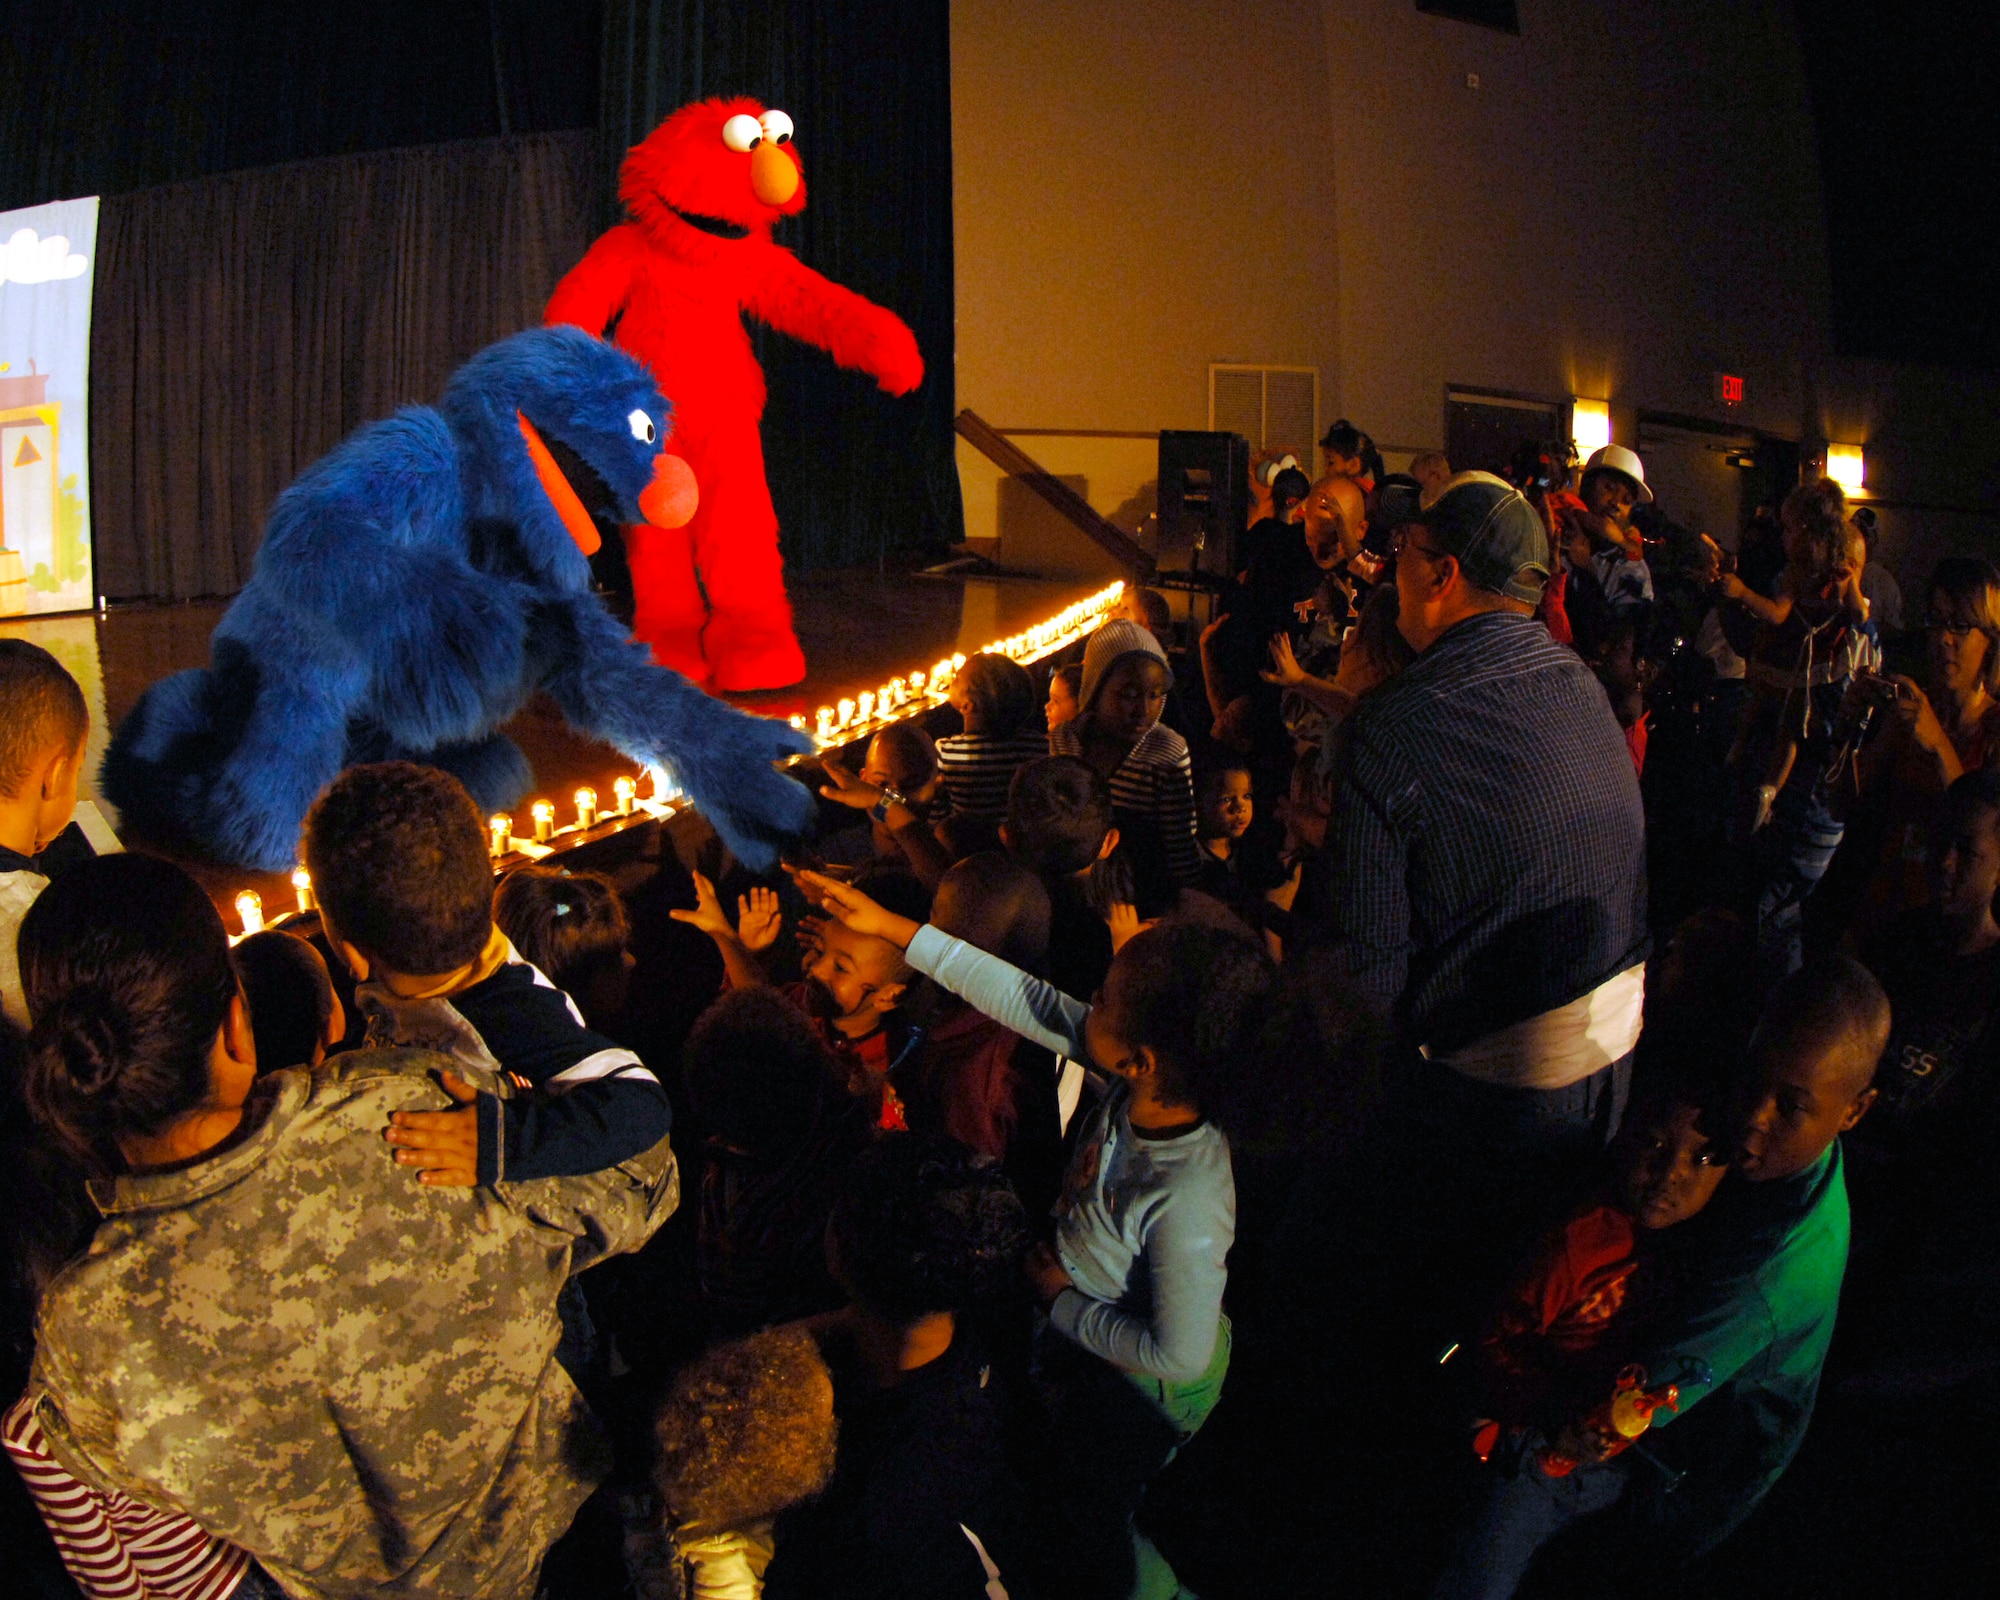 Grover and Elmo take time to meet children during “The Sesame Street Experience for Military Families” USO Tour Oct. 16 and 17 at the base theater. The show was designed to provide parents with new tools to help their children learn how to deal with the hardships of deployments and military life. (U.S. Air Force photo/Senior Airman Steven R. Doty)